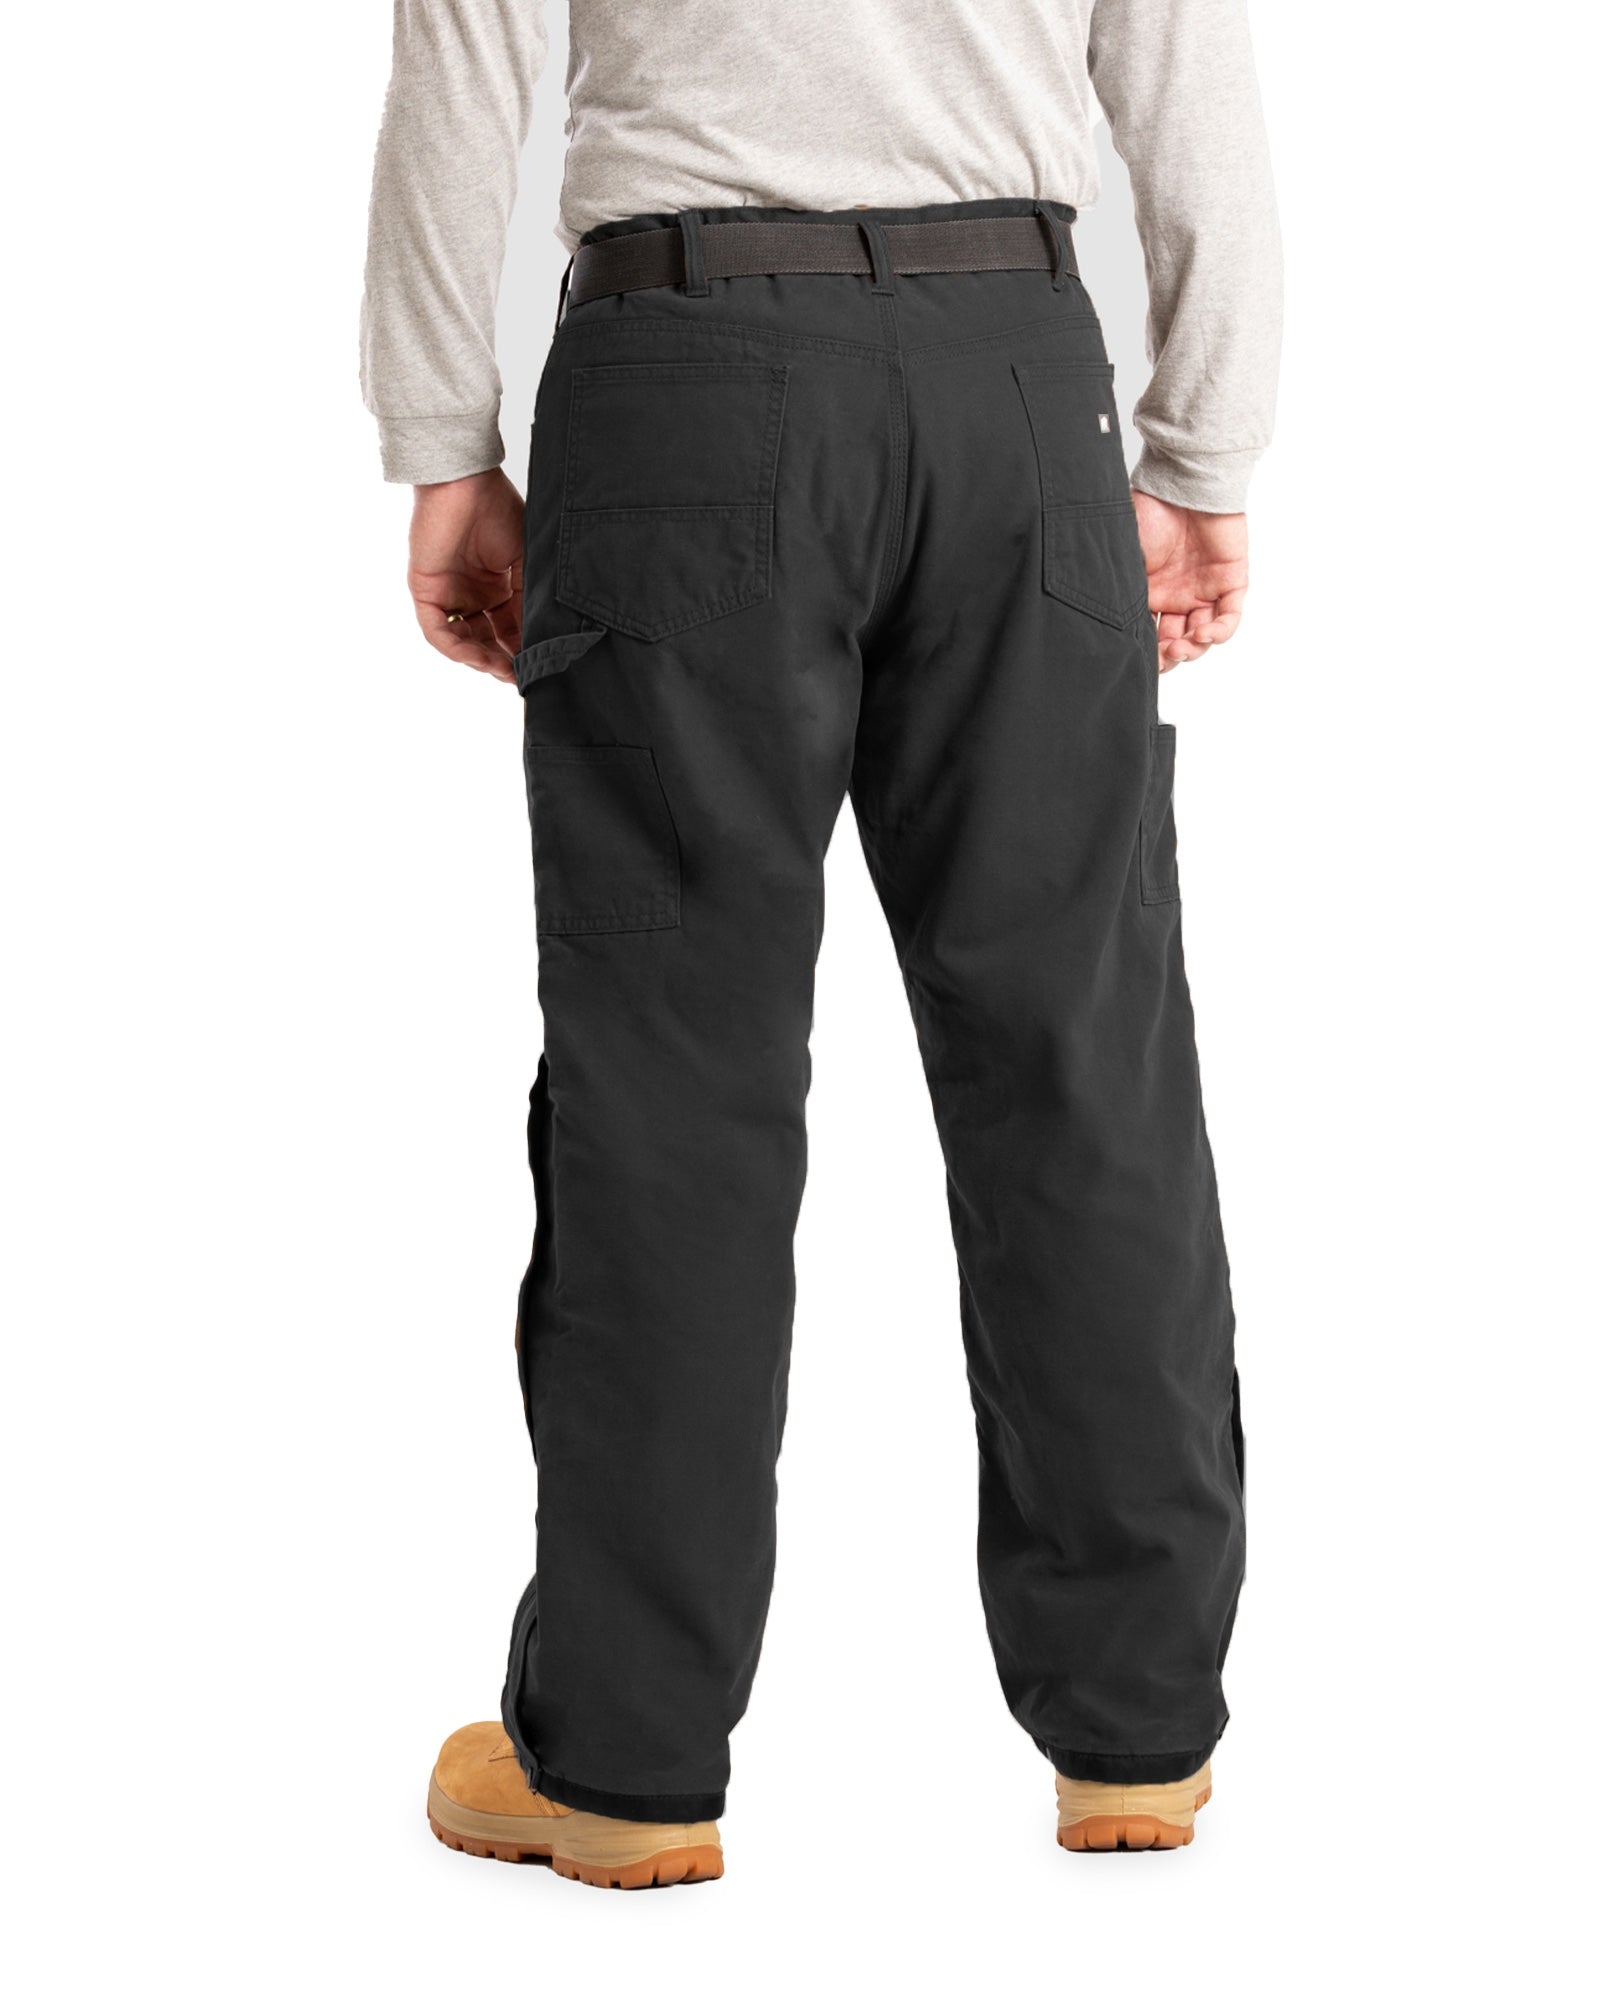 P966BK Highland Washed Duck Insulated Outer Pant